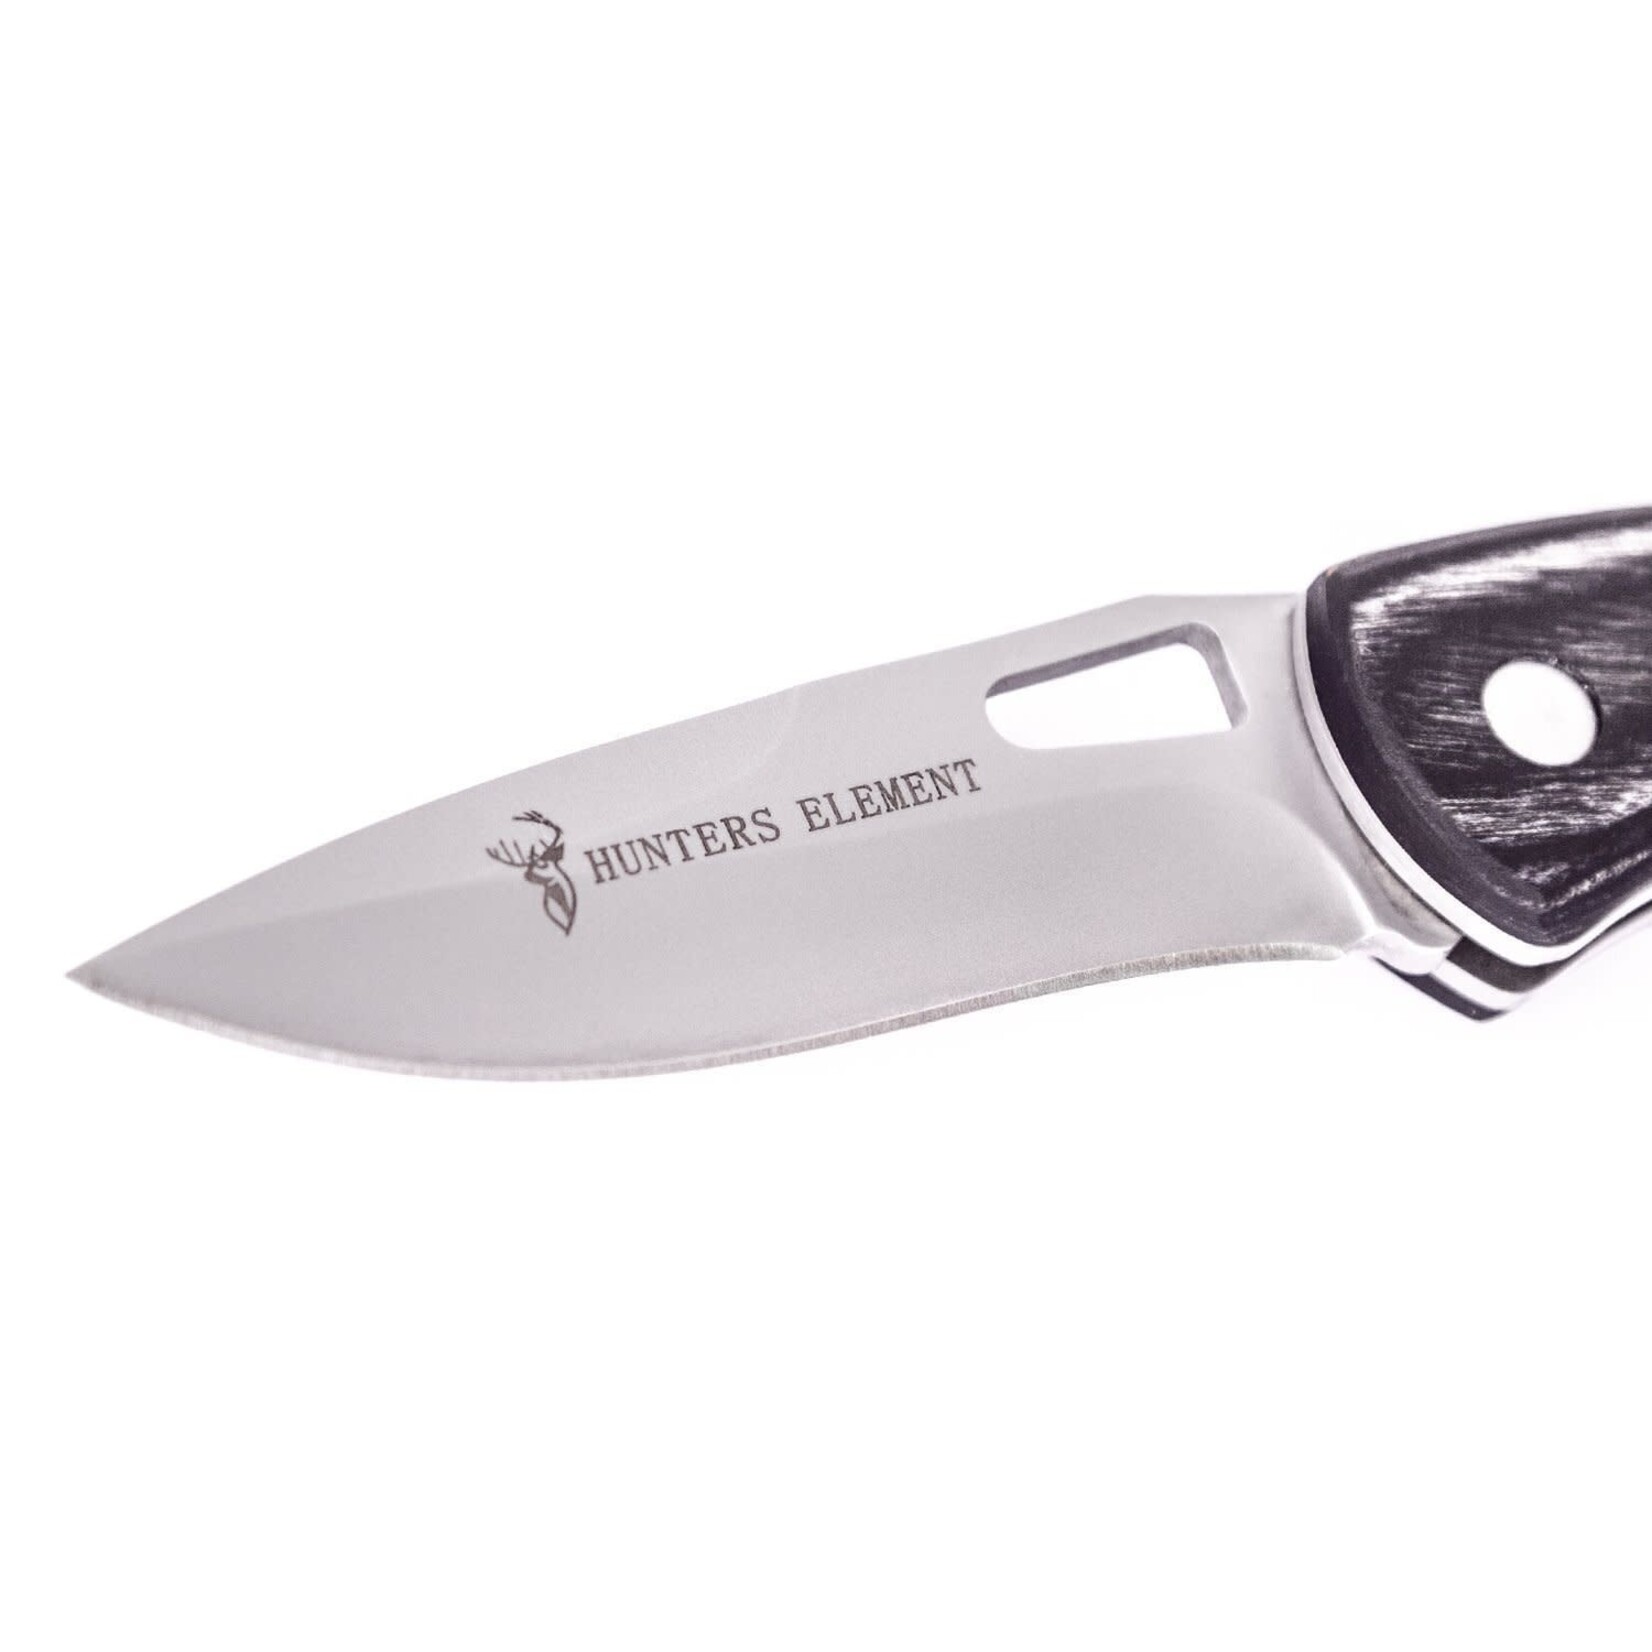 Hunters Element Hunters Element Primary Folding Drop Point Knife - Leather Pouch